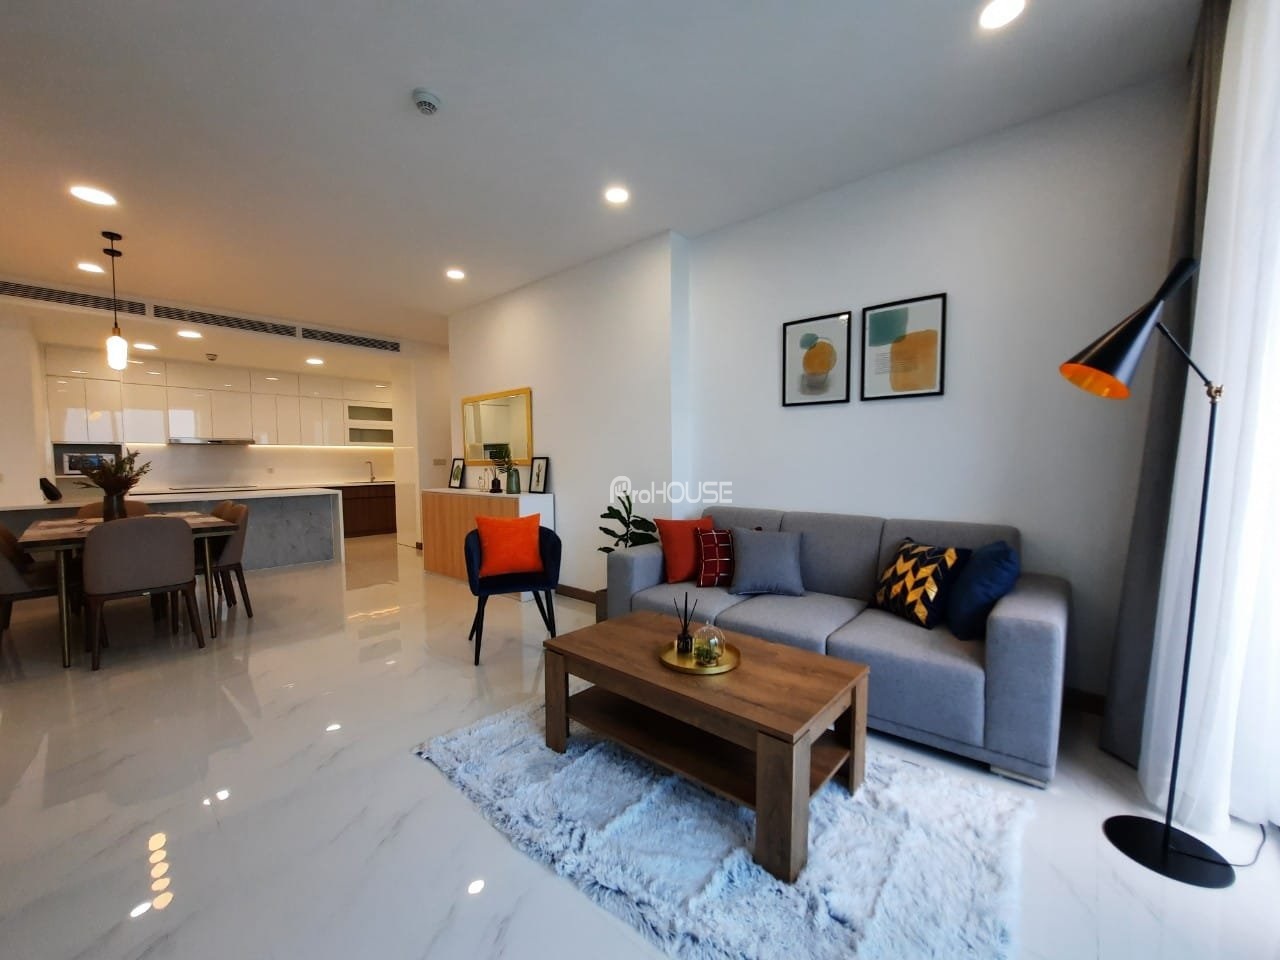 Large 3-bedroom apartment for rent in Sunwah Pearl with direct river view